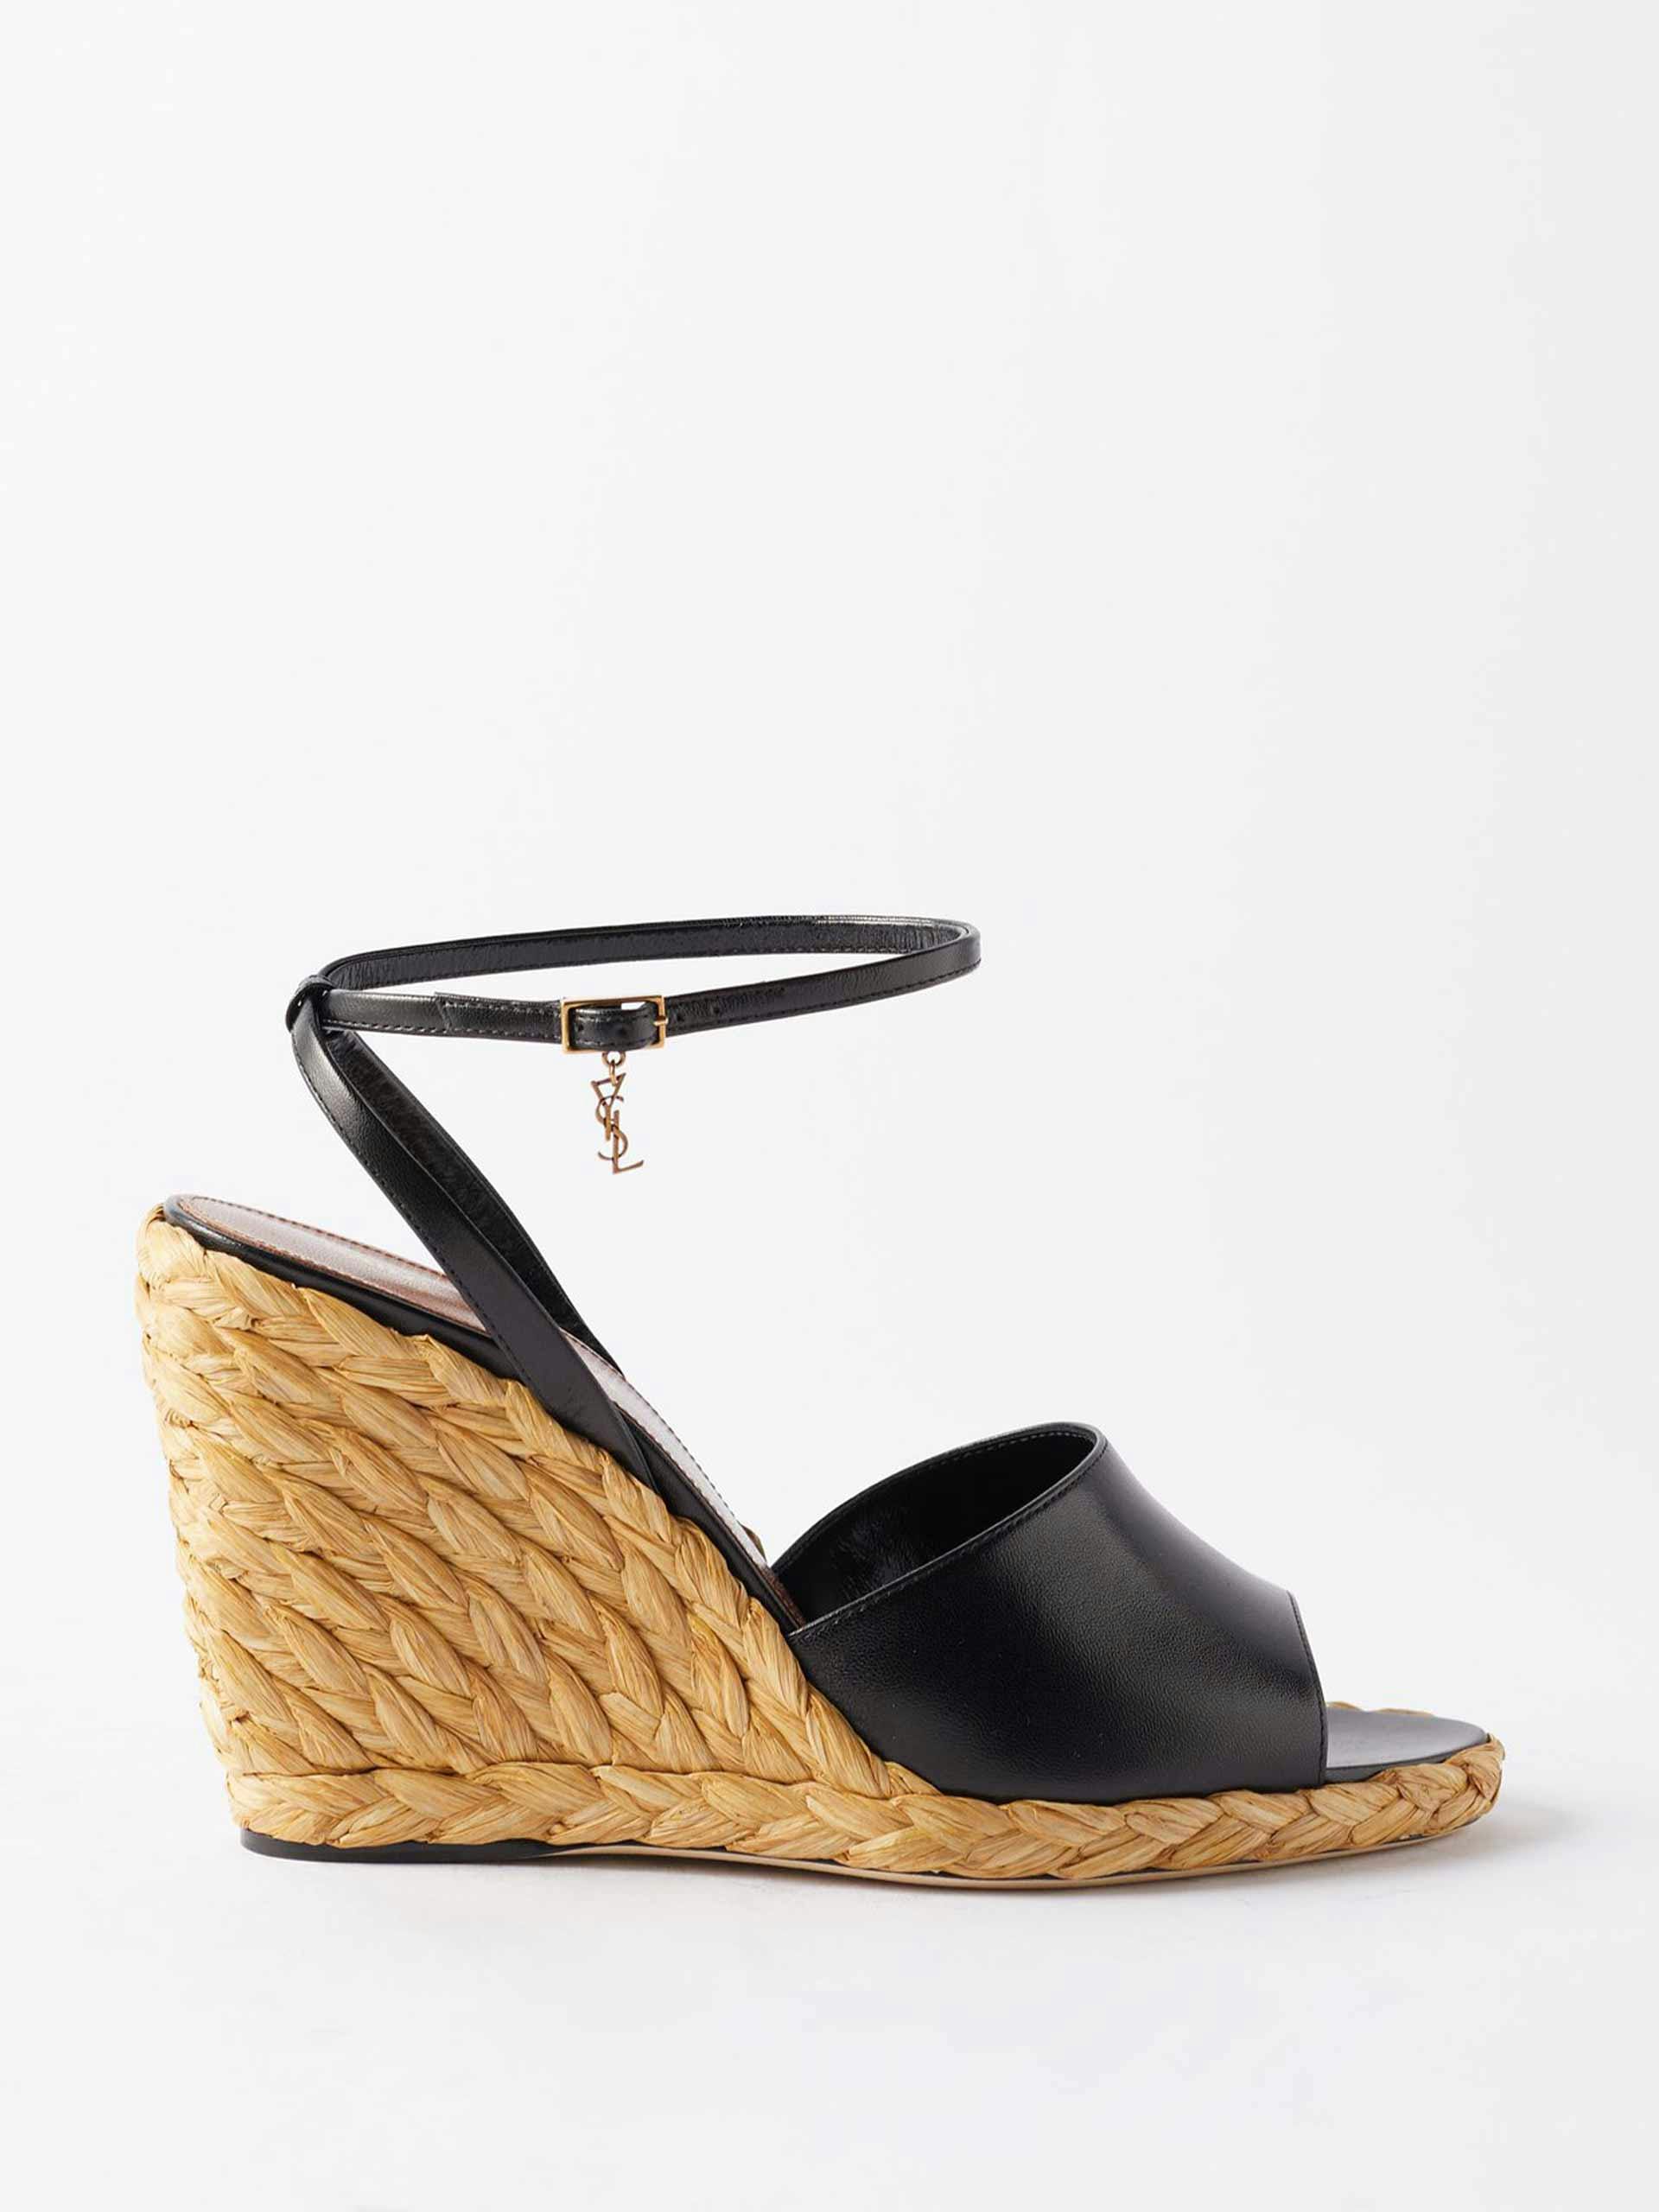 Black leather and jute wedges